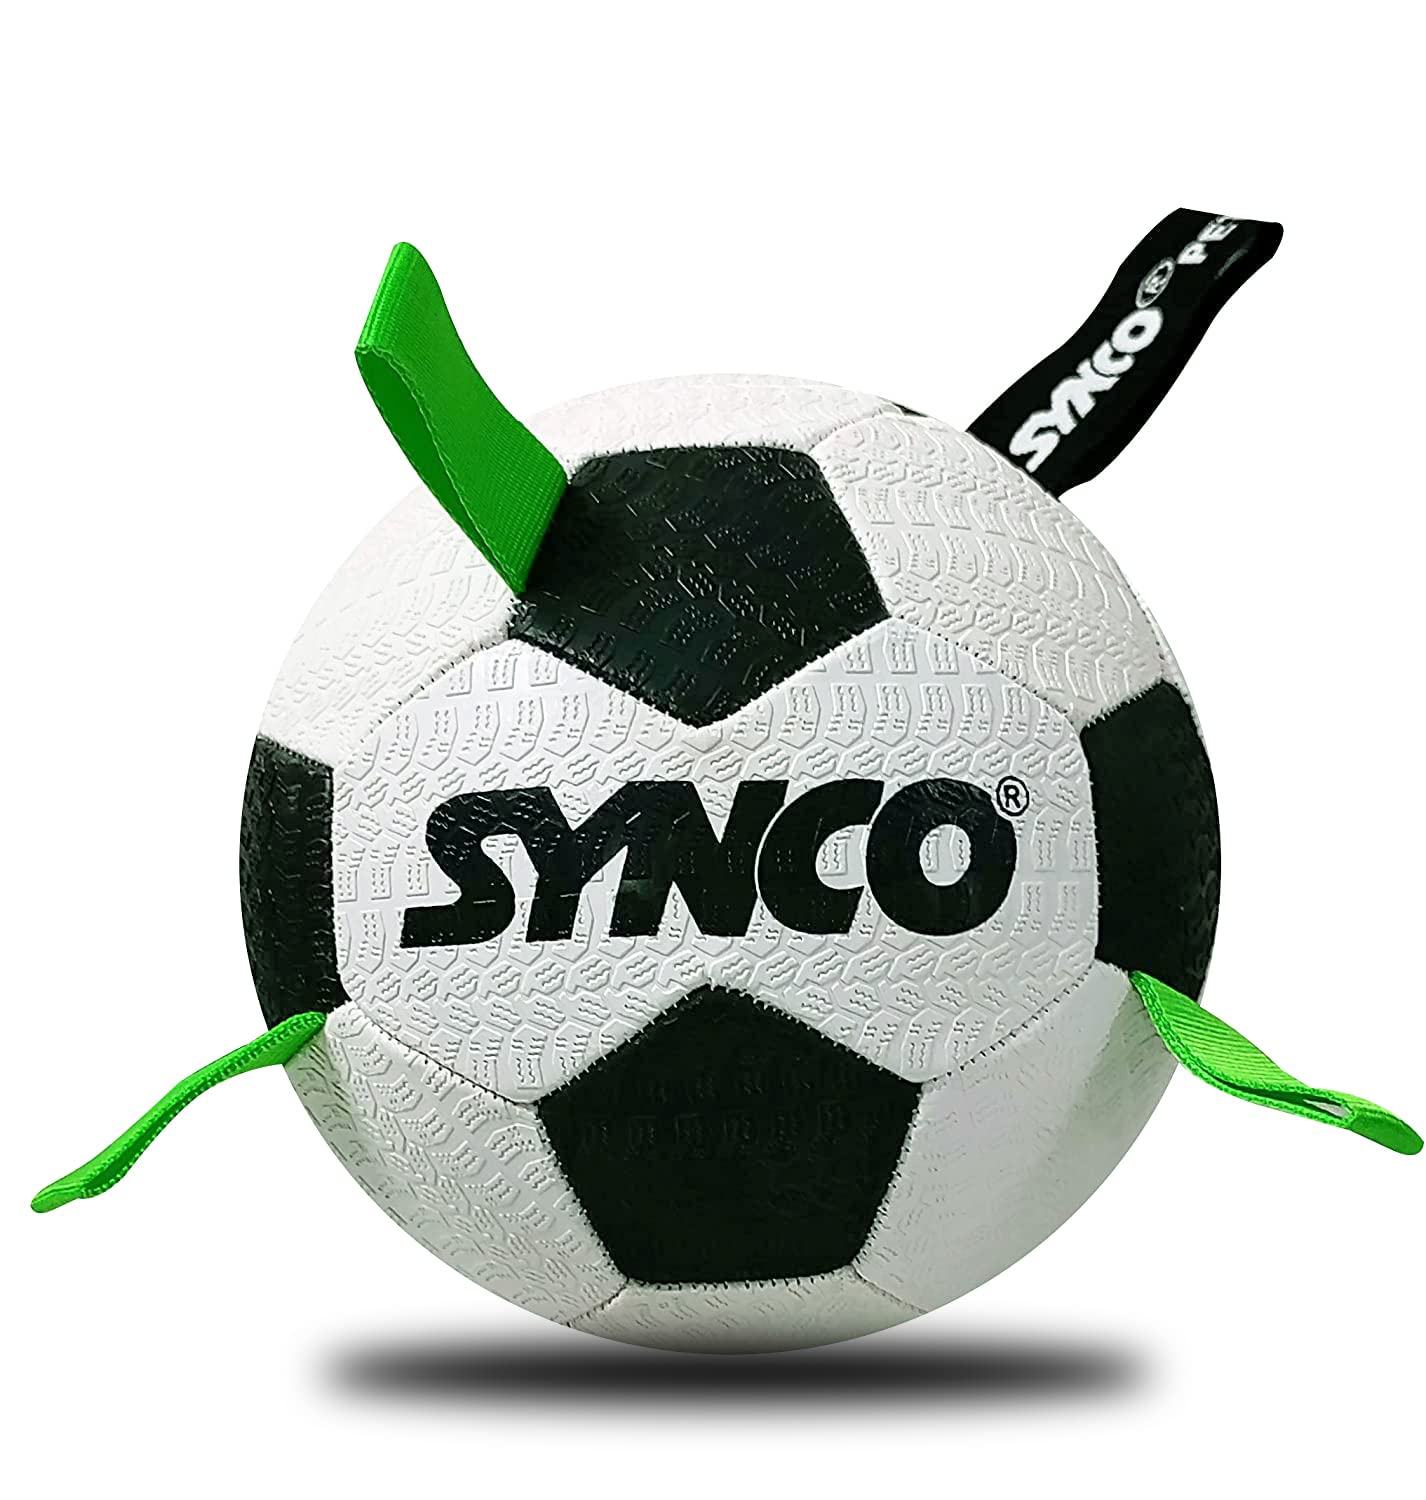 Synco Football with Green Holding Loops| Dog Ball Size-3| <Br>Dog Toy| Dog Ball (White) - 1